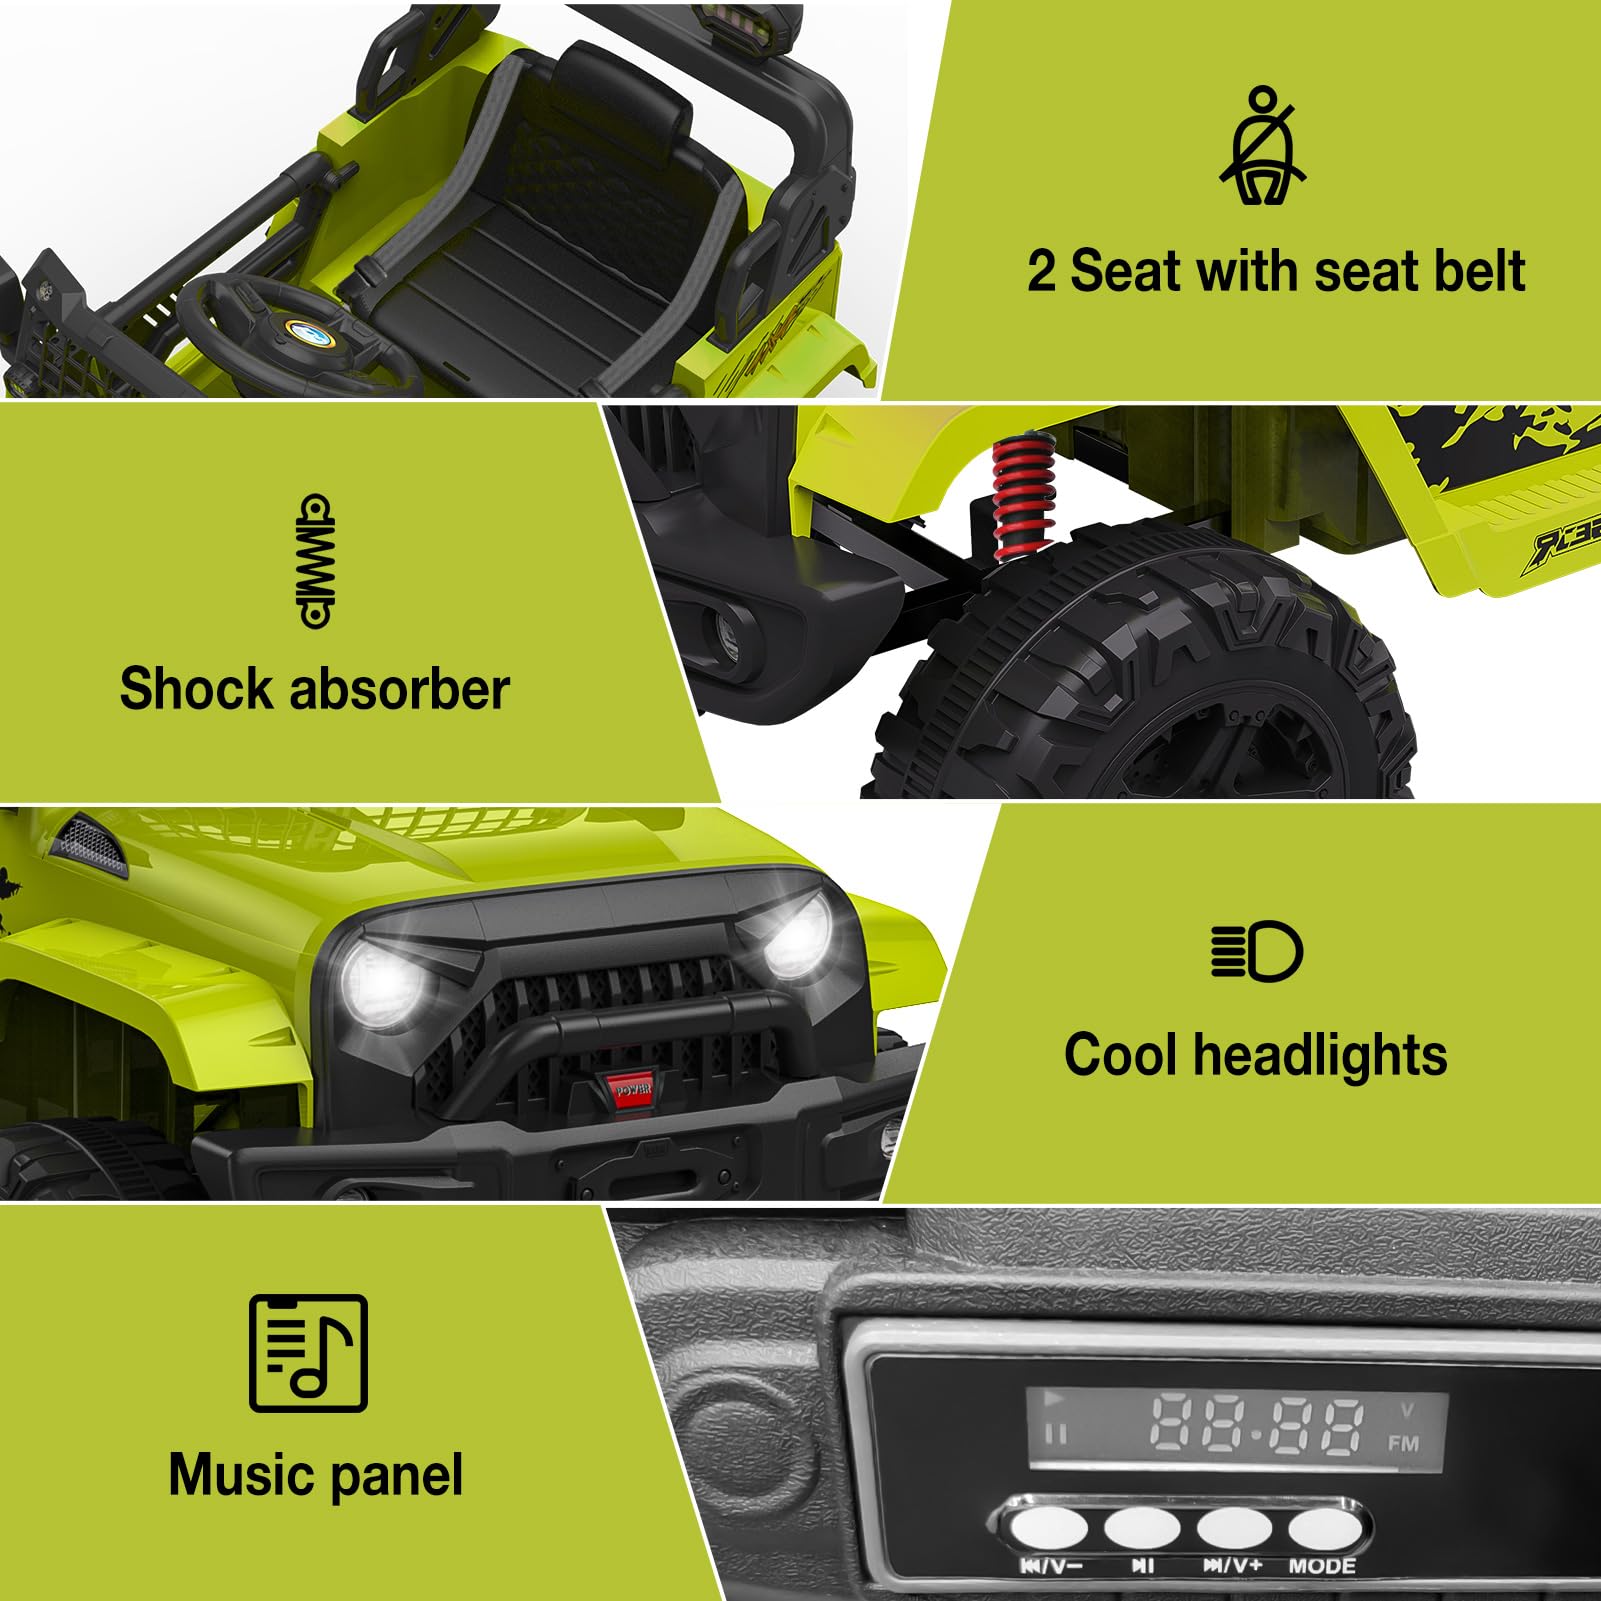 Ride on Truck Car 12V Kids Electric Mini Jeep with Remote Control Spring Suspension, LED Lights, Bluetooth, 2 Speeds (Green) - image 5 of 8